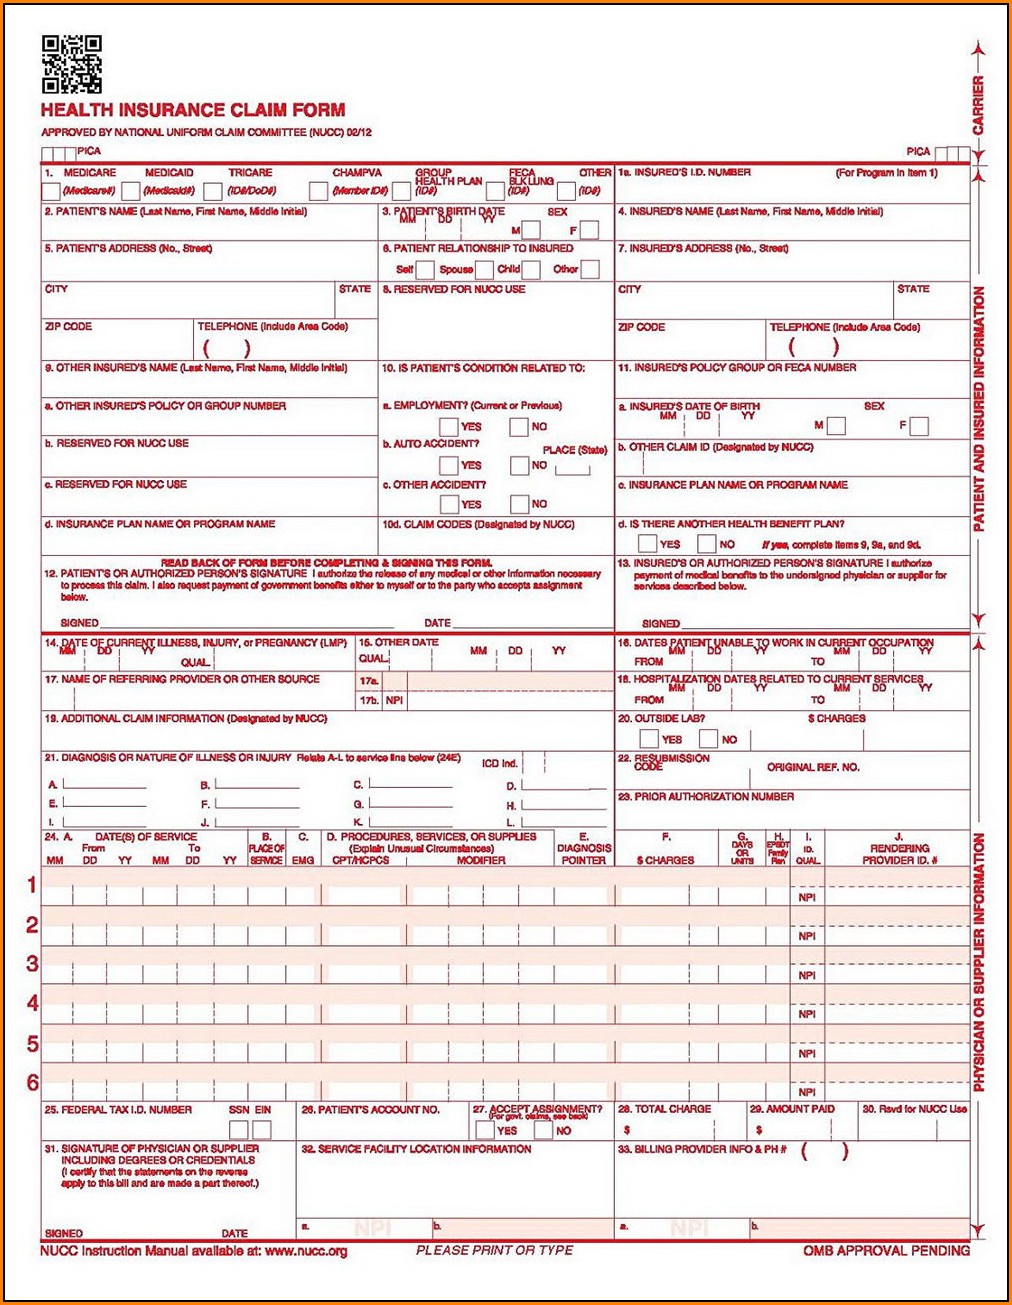 Cms 1500 Claim Form Free Download